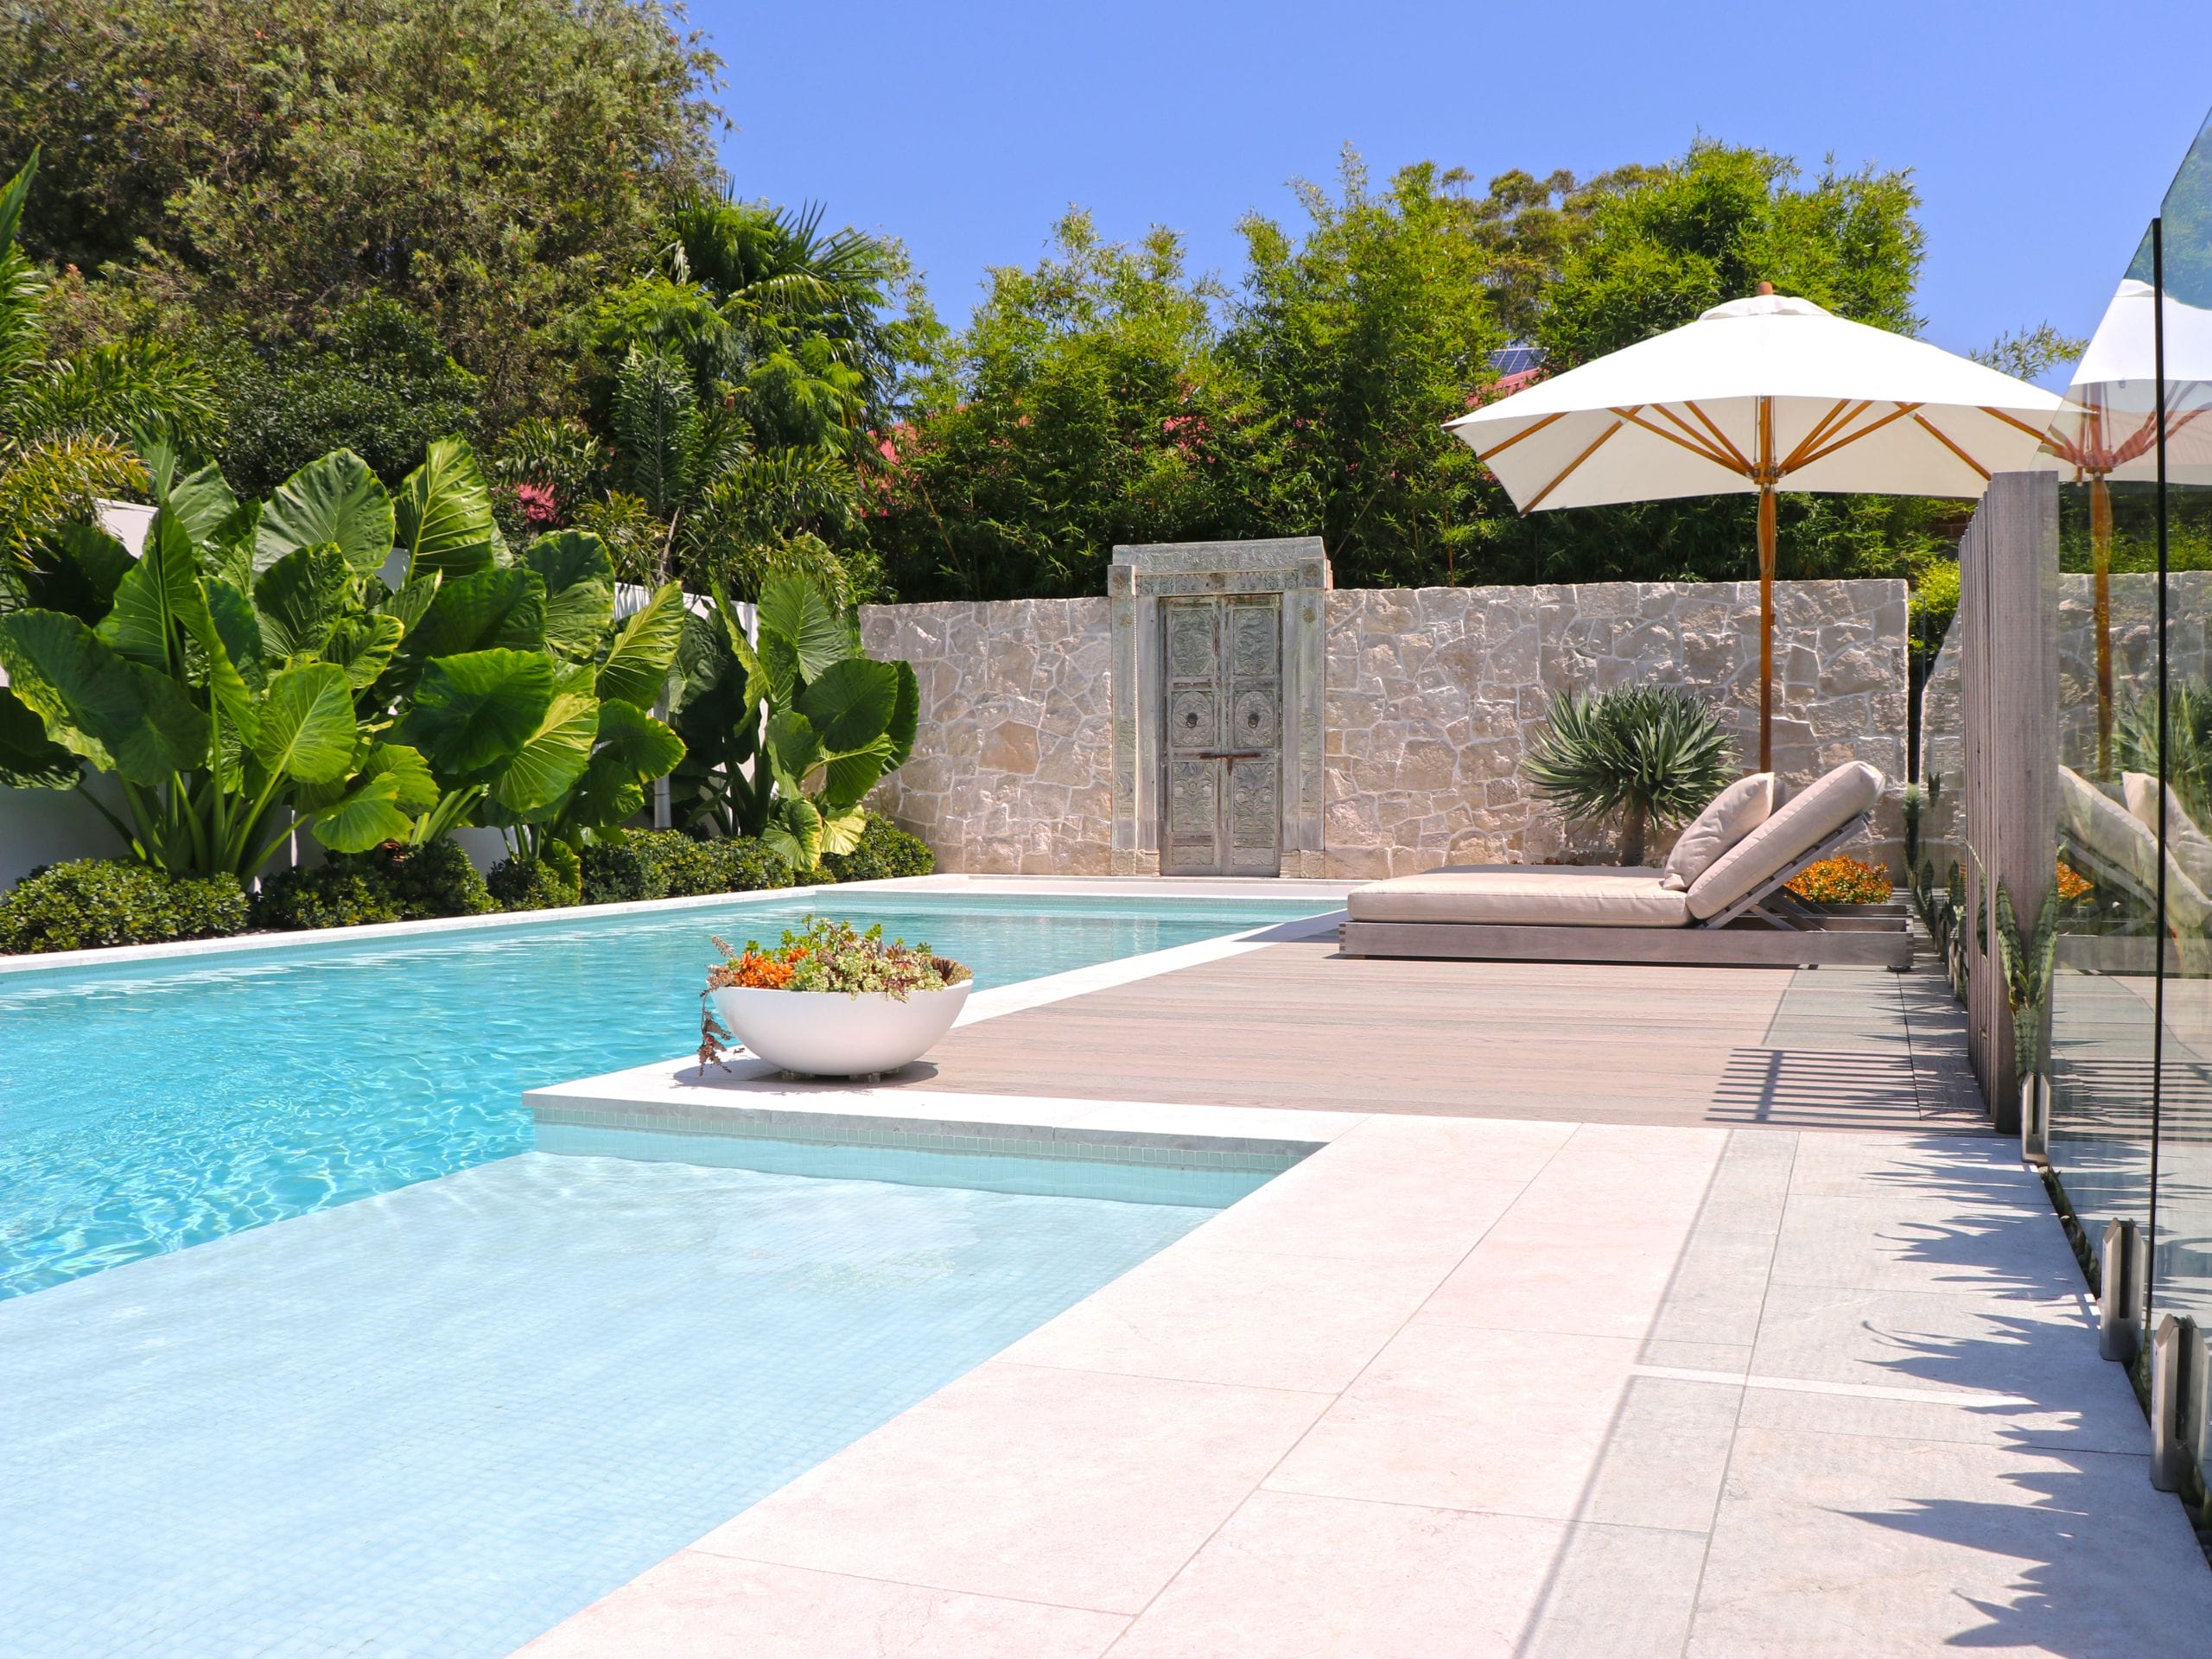 Creating a resort vibe for your home is easier than you might think with our pool ideas